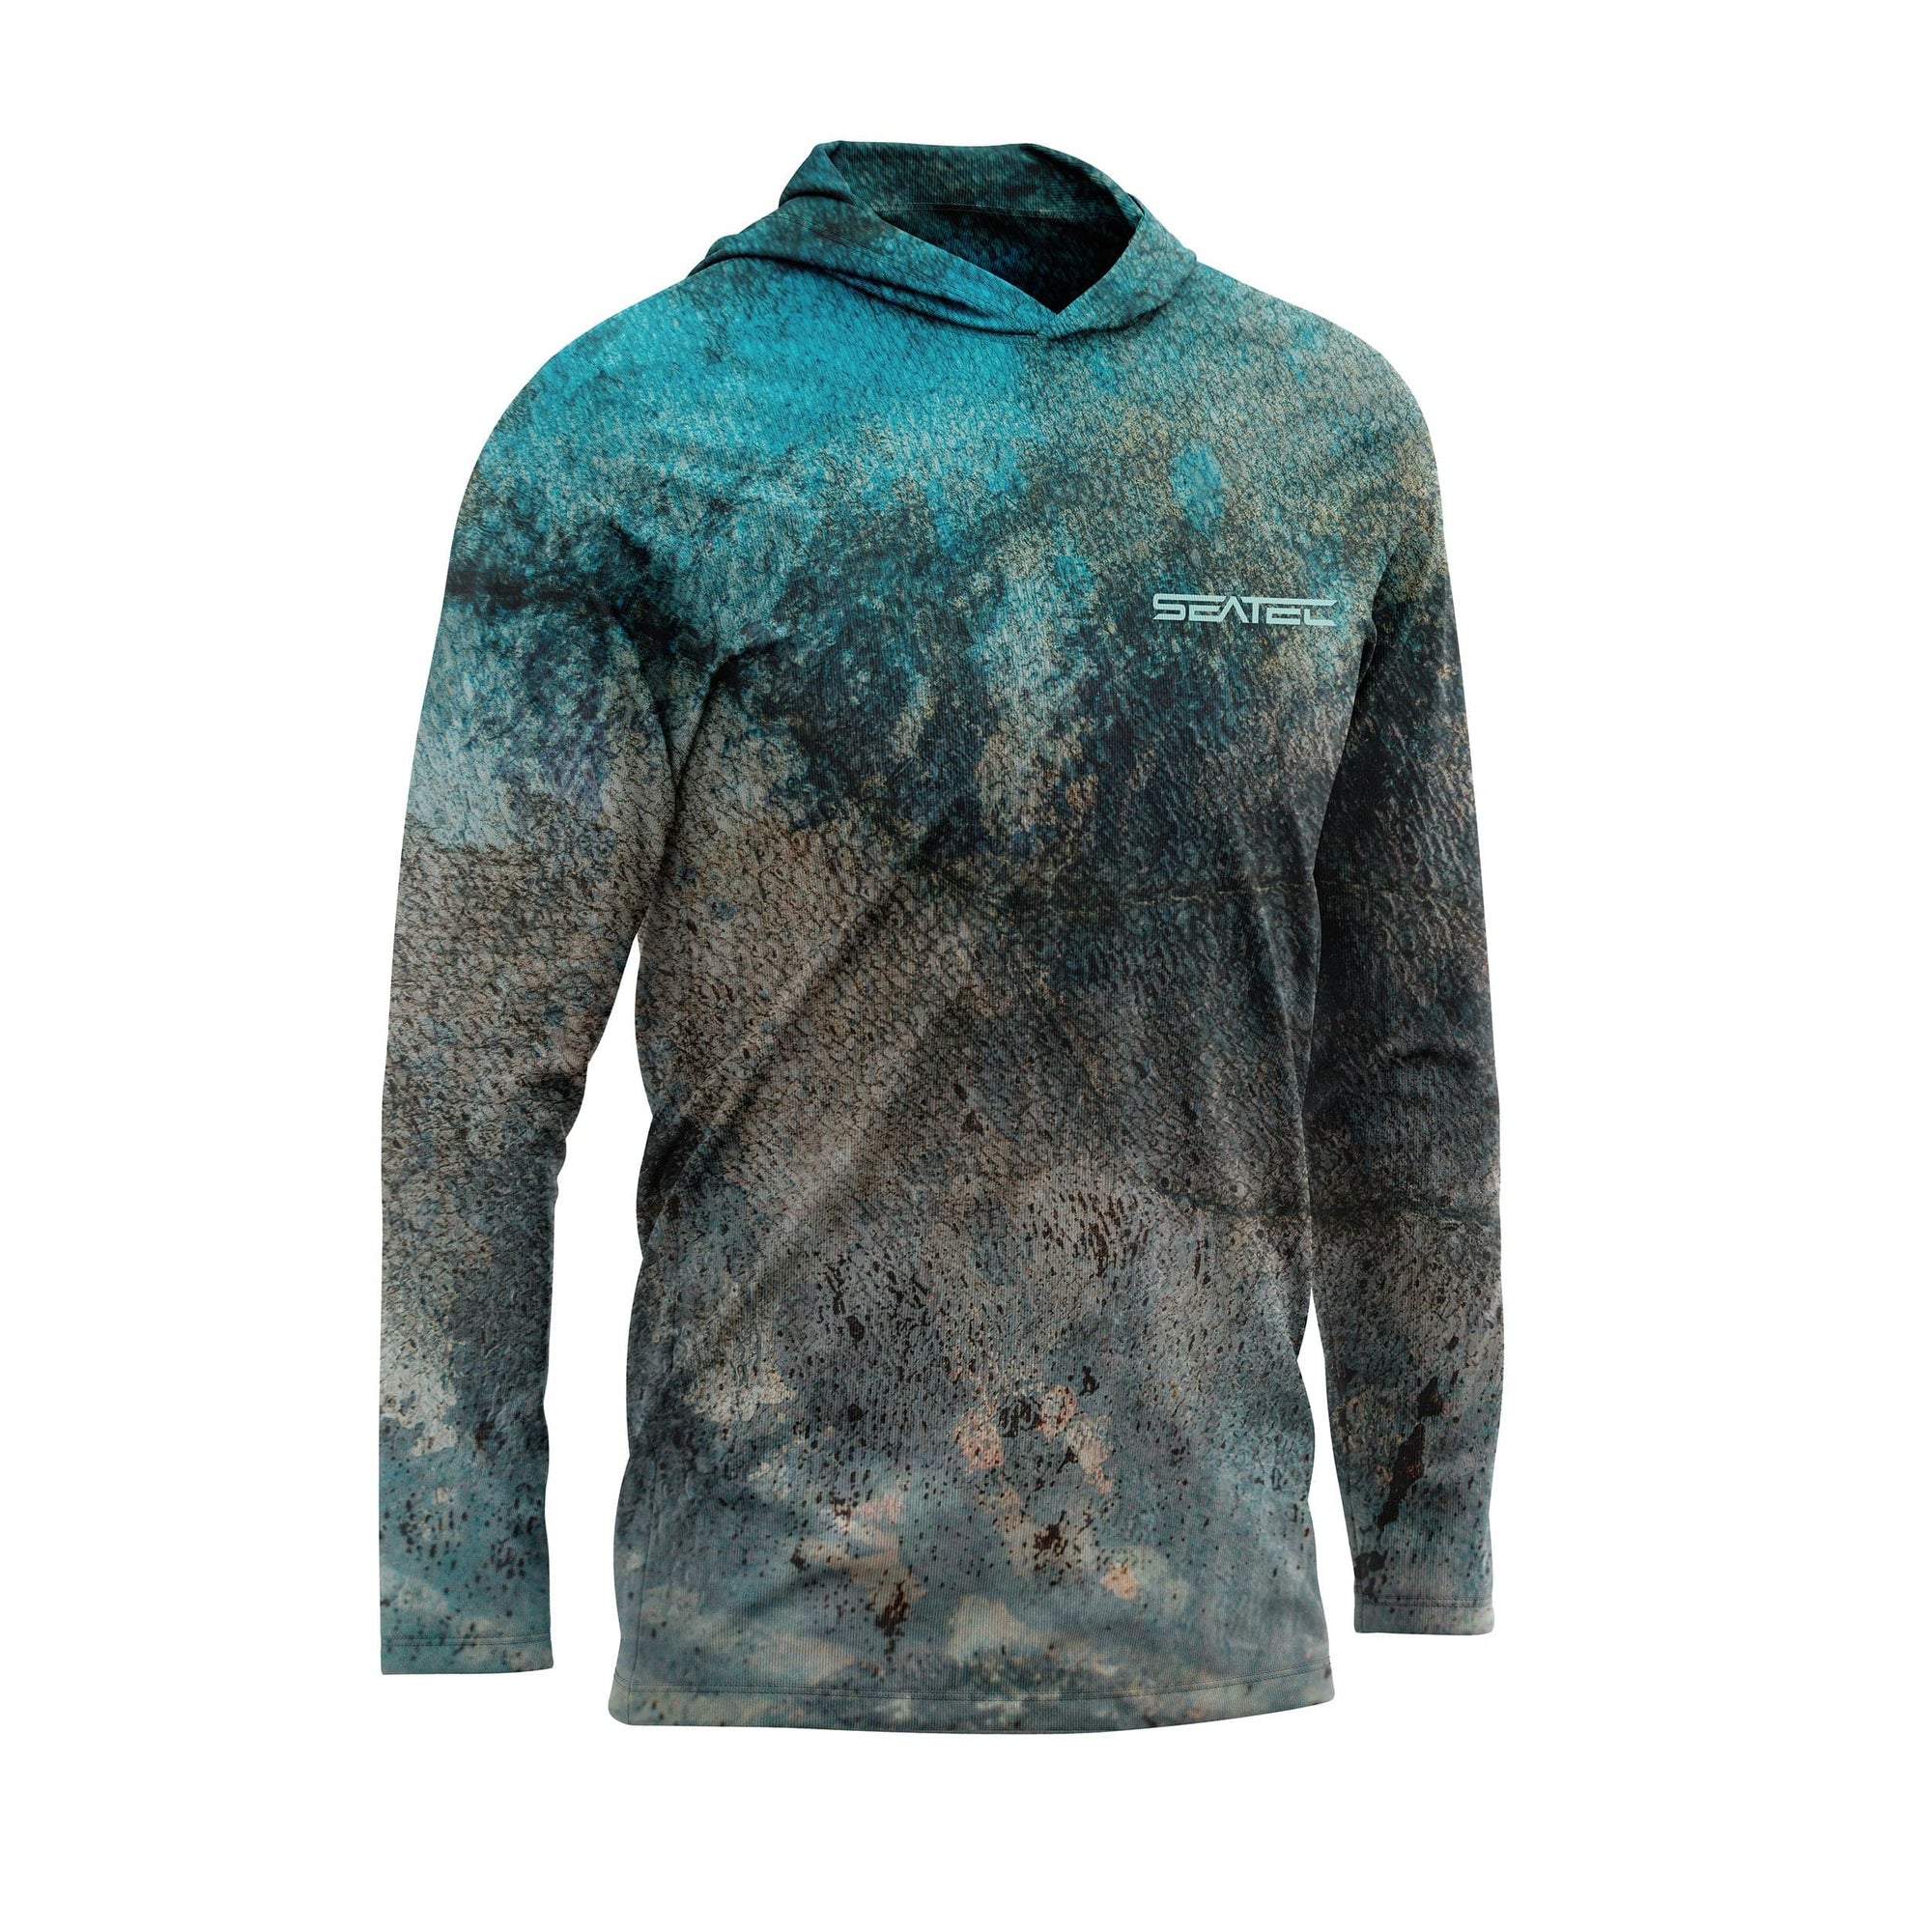 Seatec Outfitters Performance Shirts S MEN'S SPORT TEC | KINGFISH | HOODED